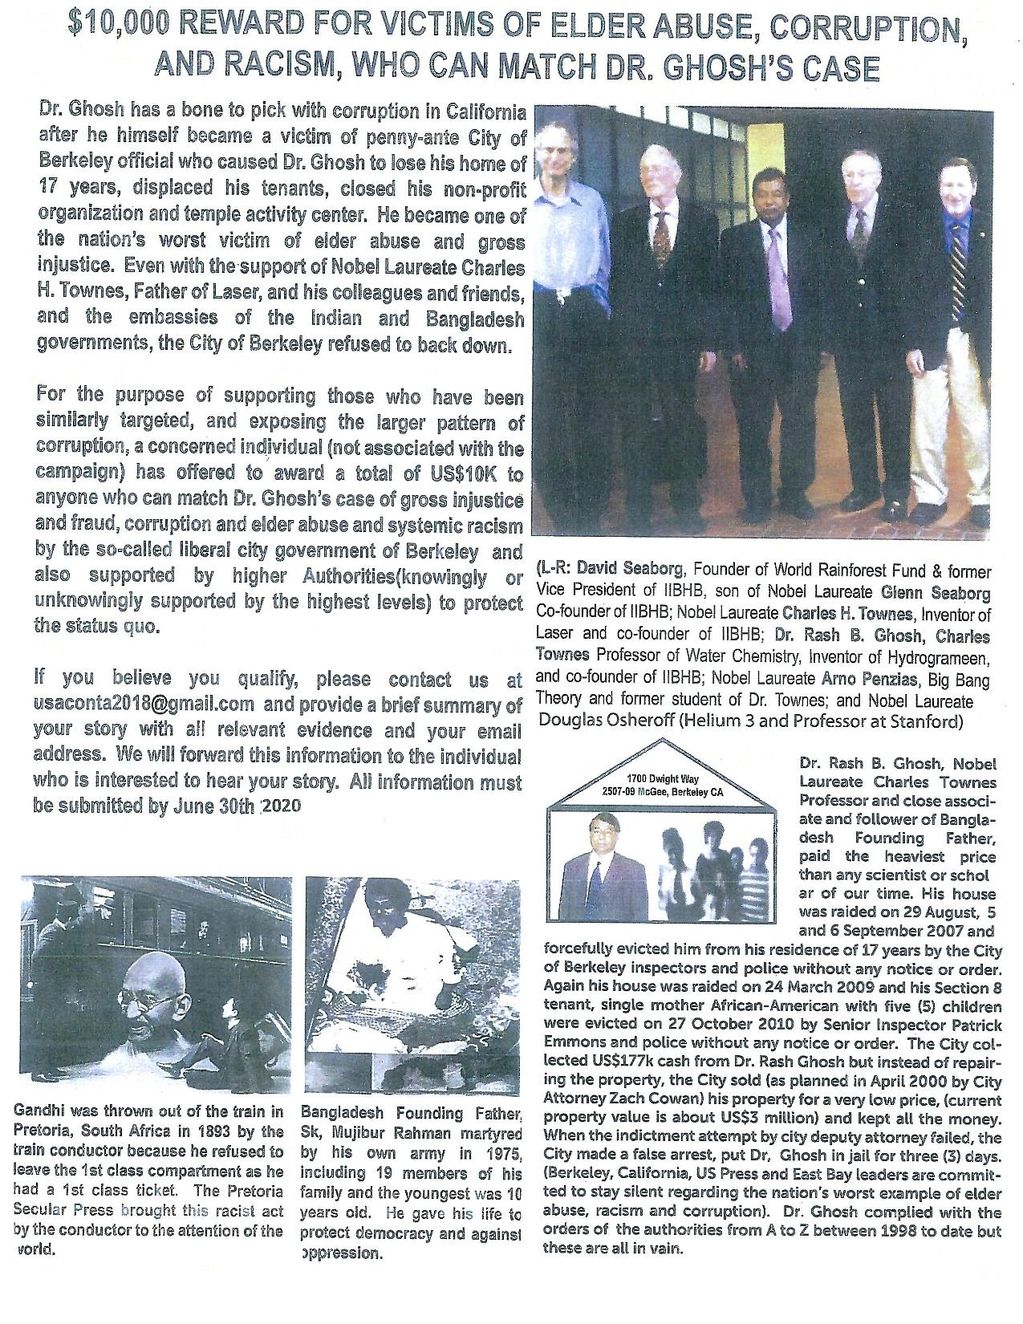 An article featuring Dr. Ghosh